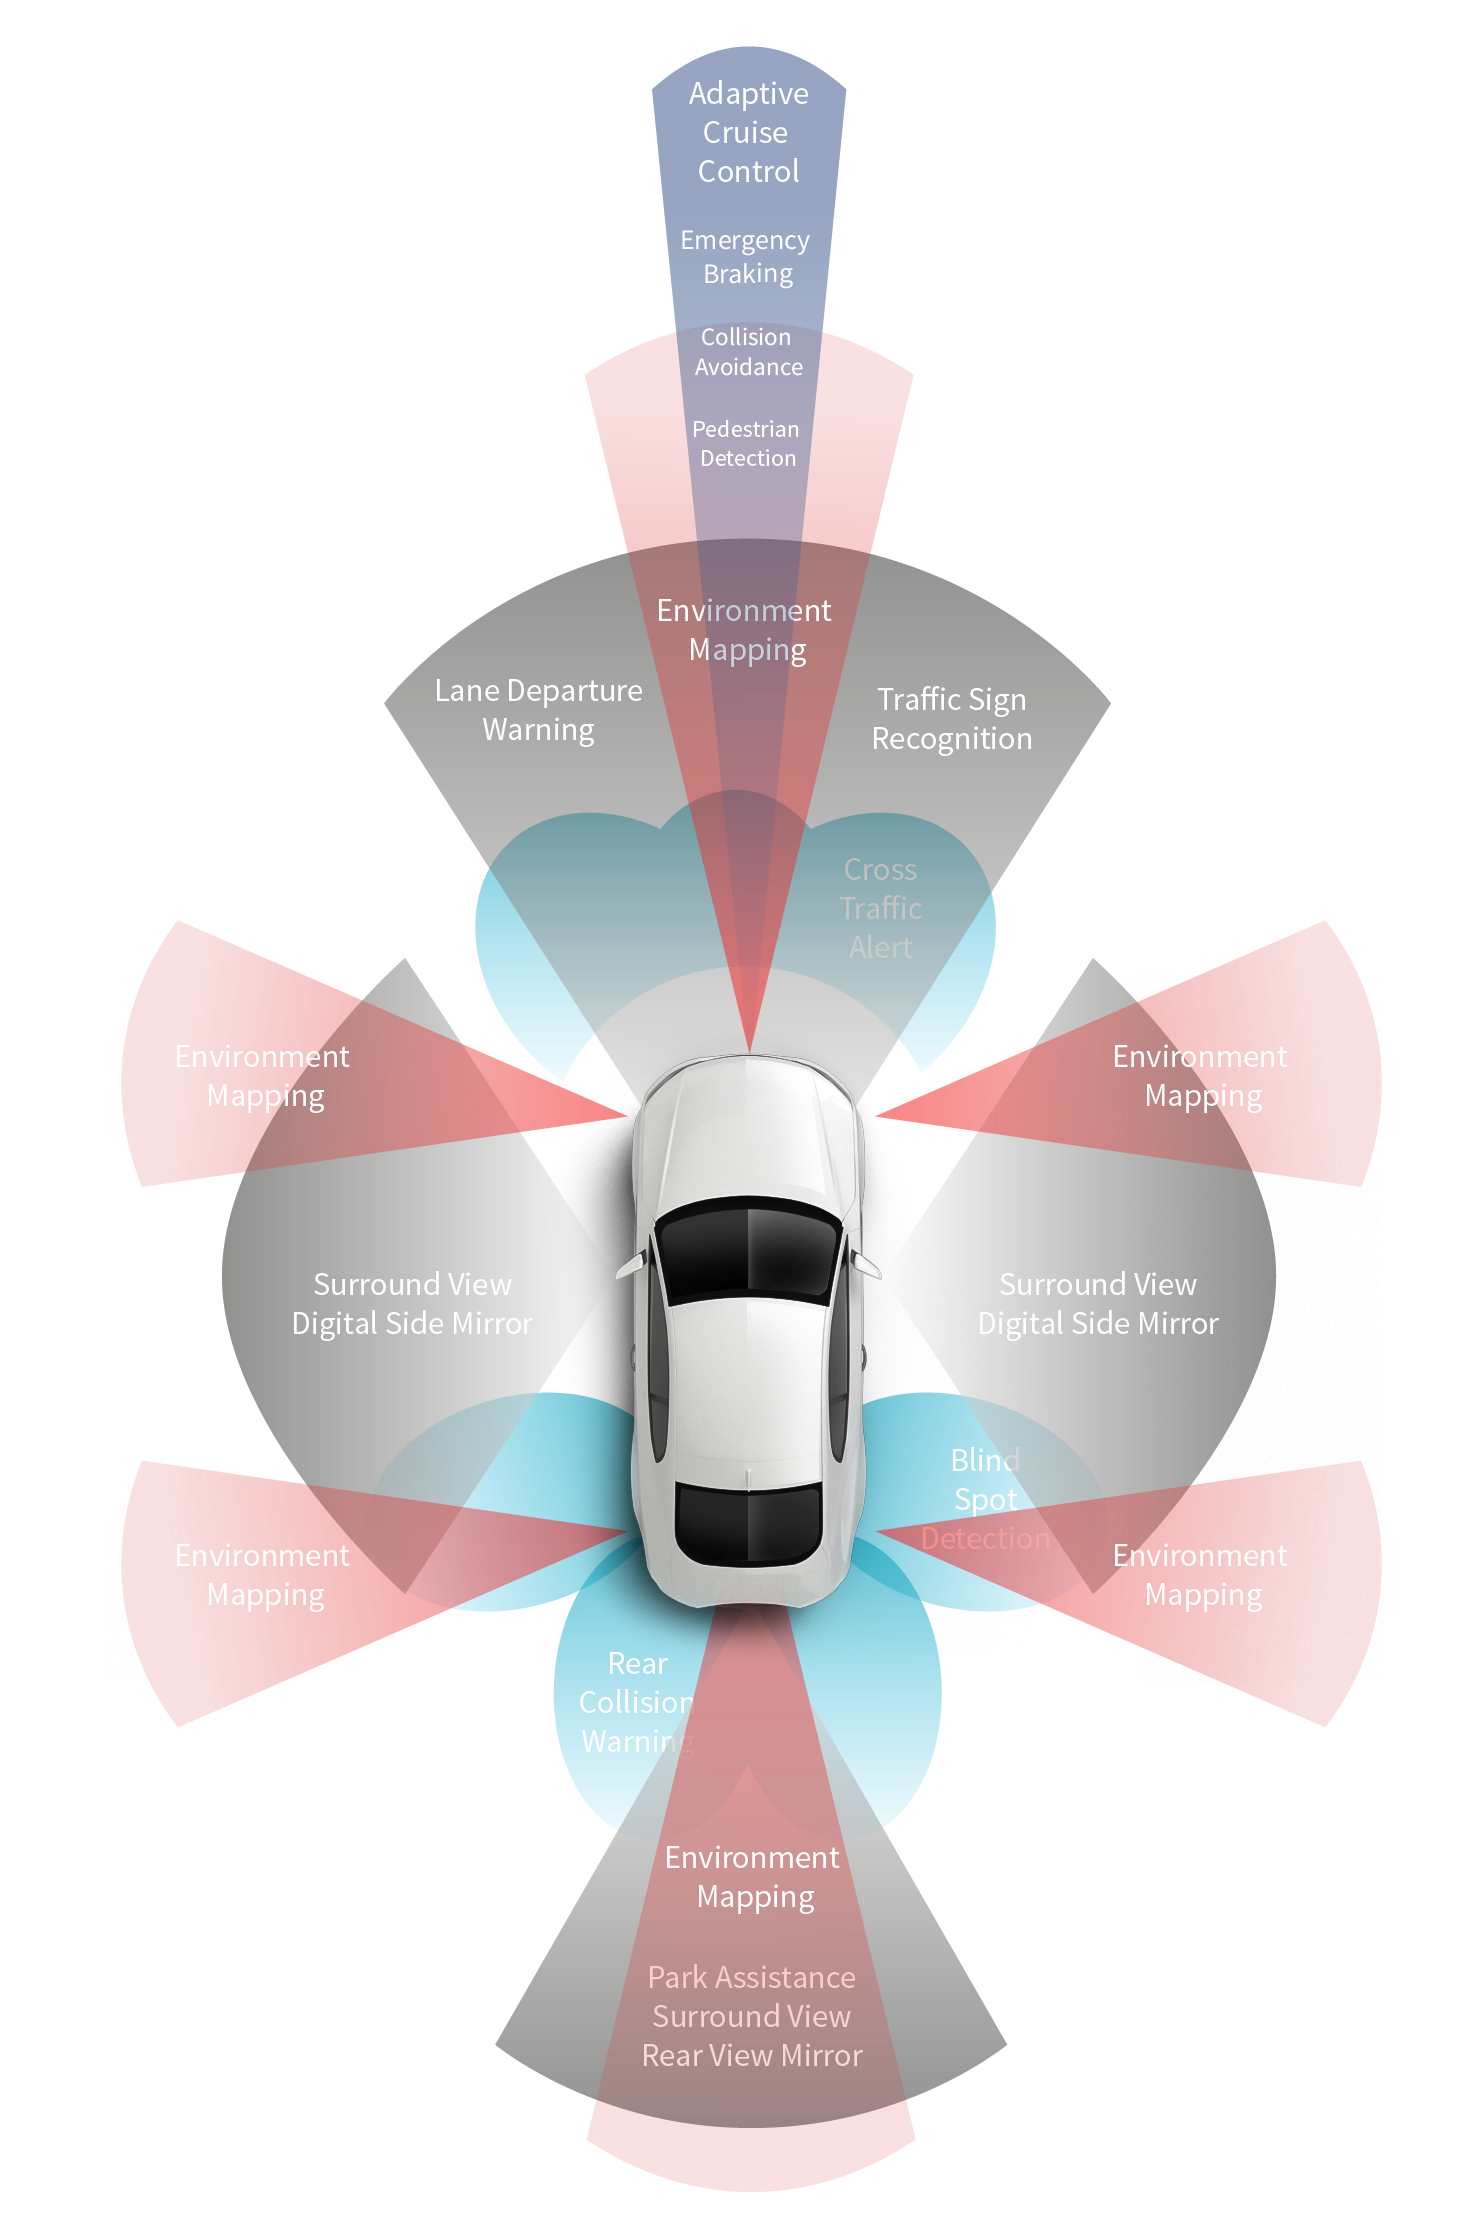 Automated Driving - ADAS (advanced driver assistance systems